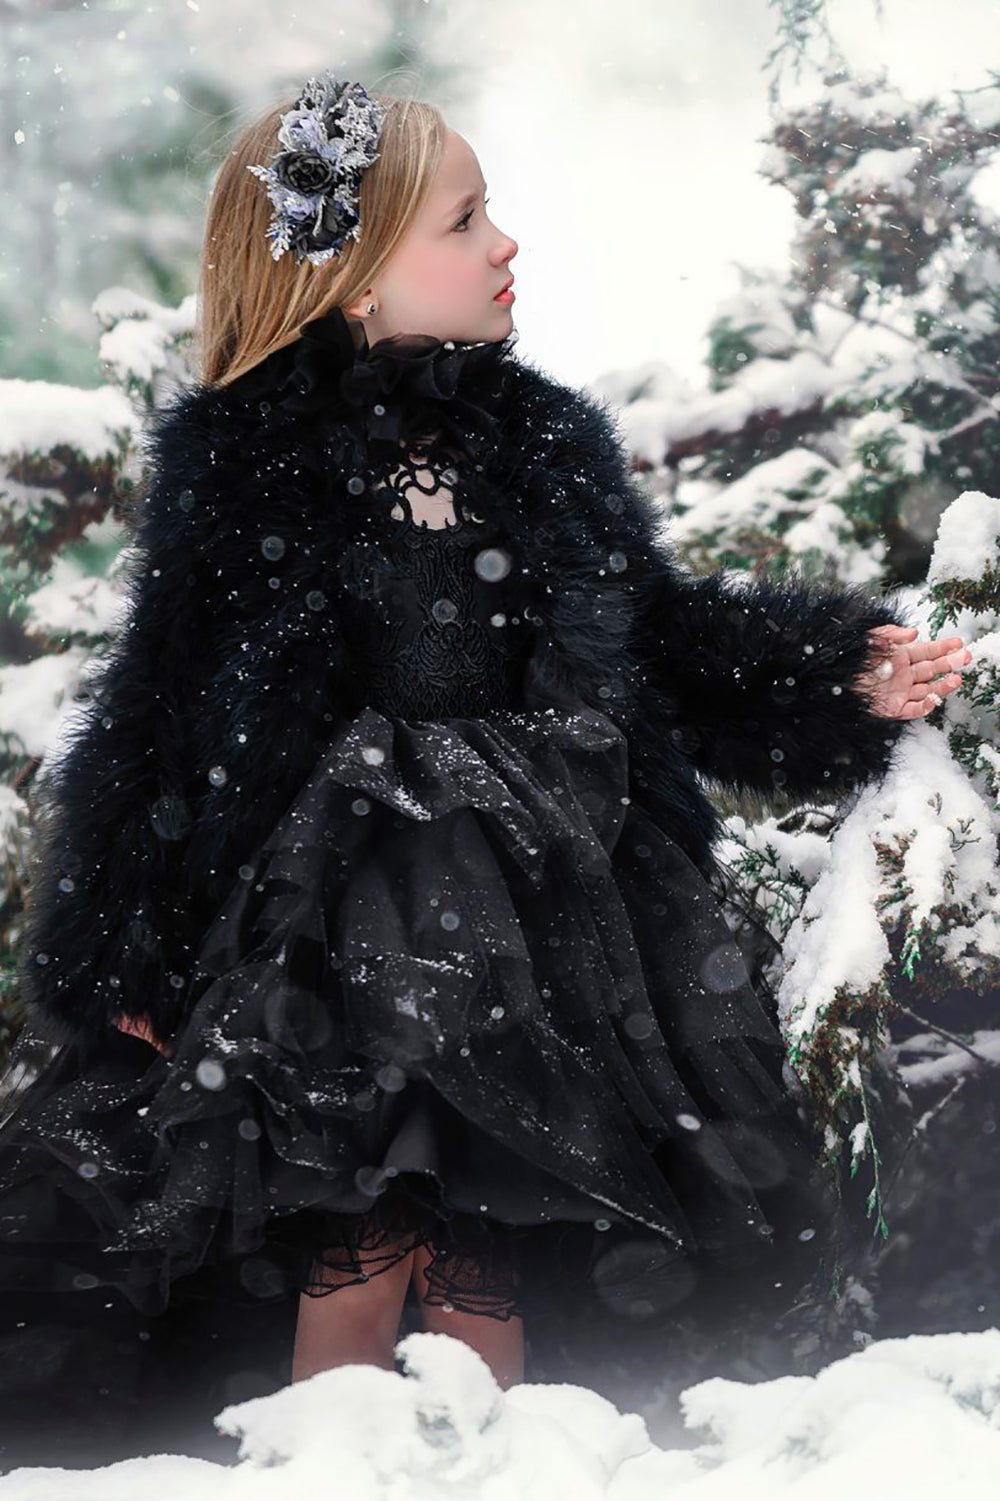 pretty little girl wearing black lace dress in the christmas snow